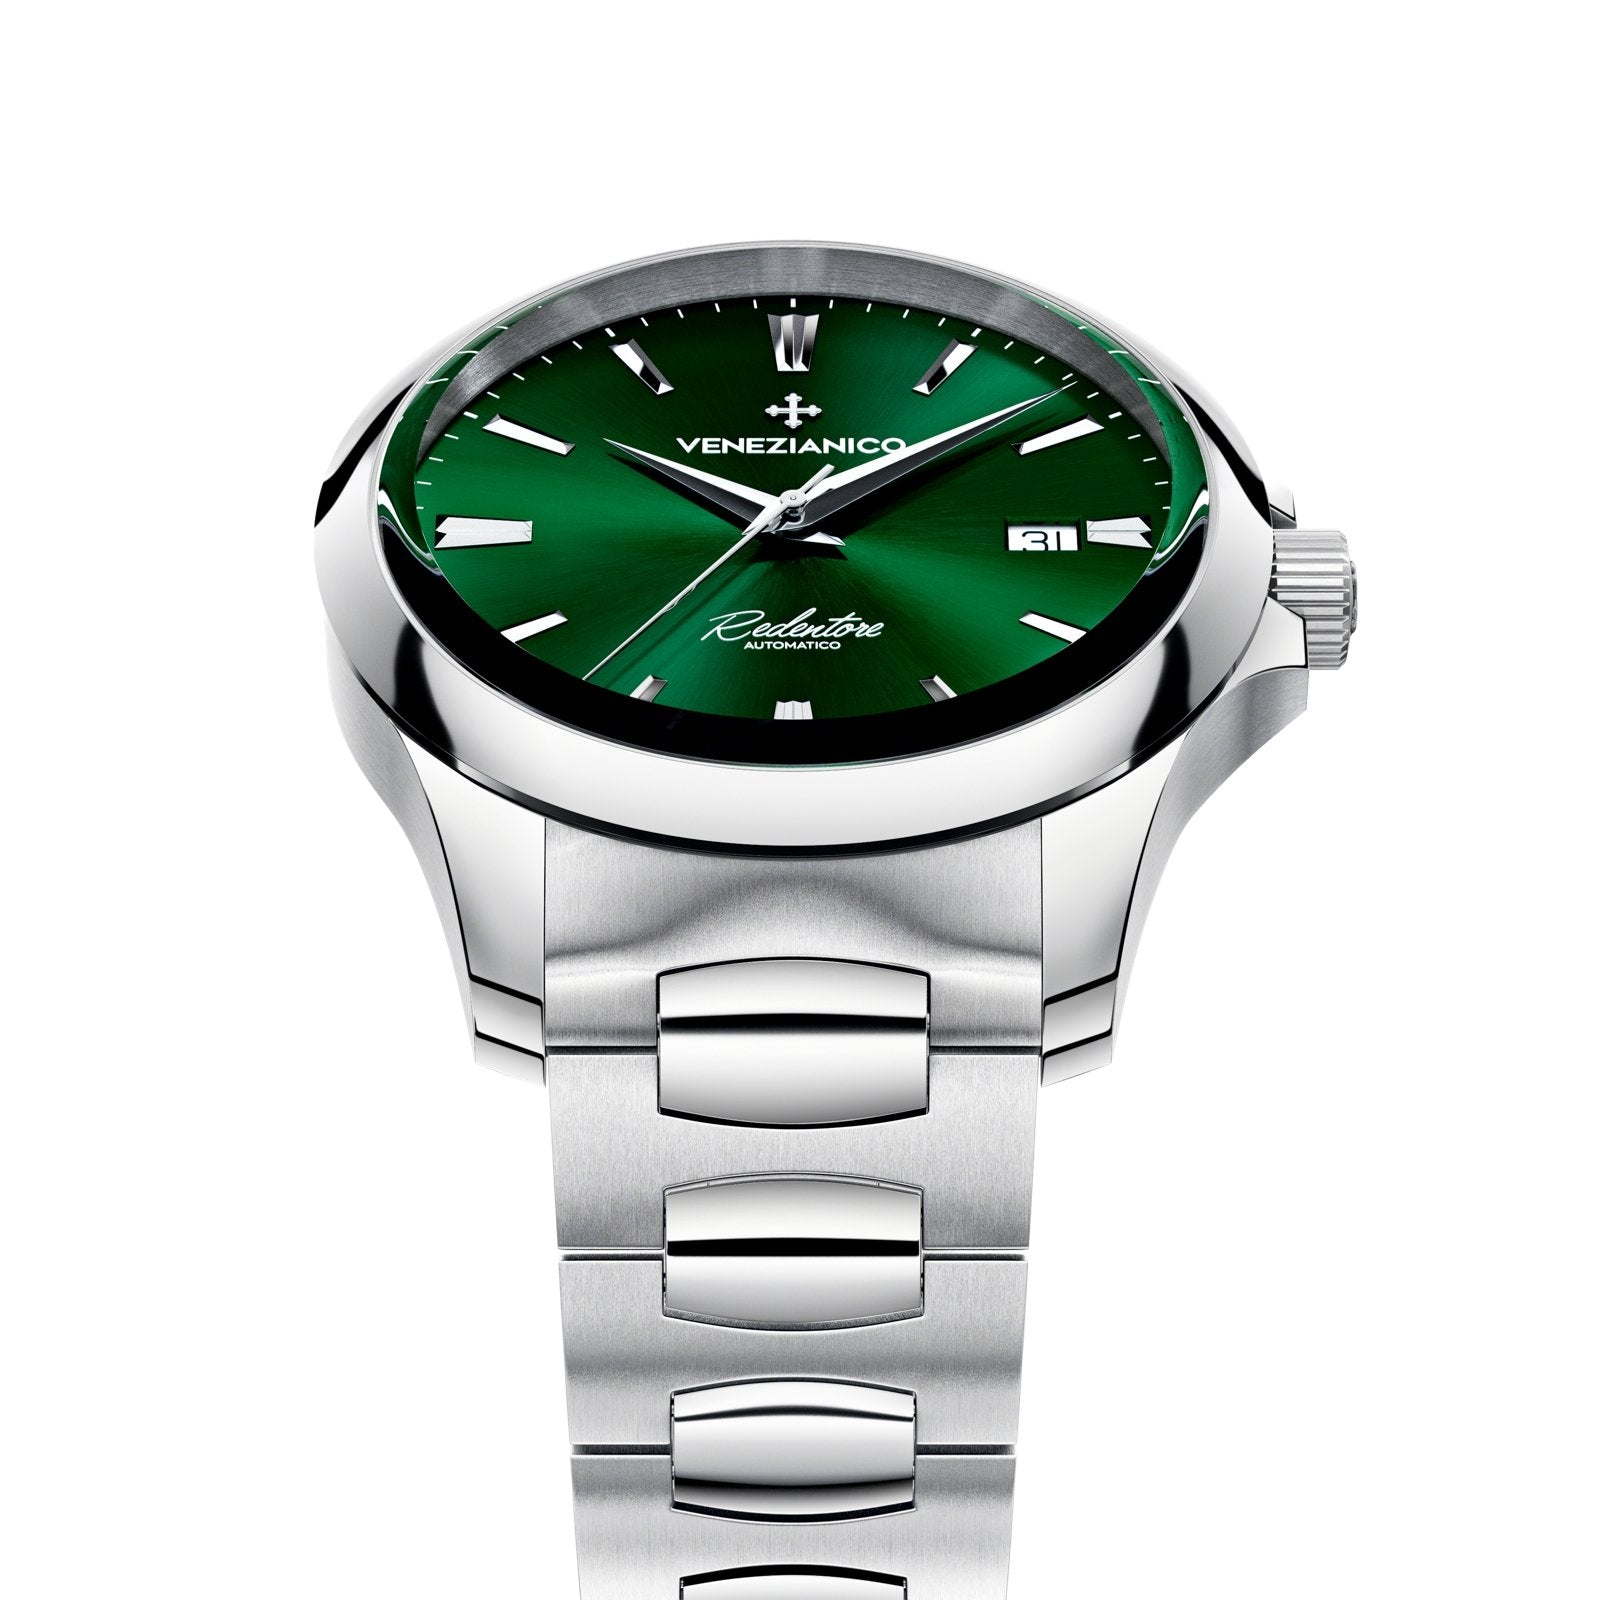 Venezianico Automatic Watch Redentore 40 Green Steel 1221501C - Watches & Crystals